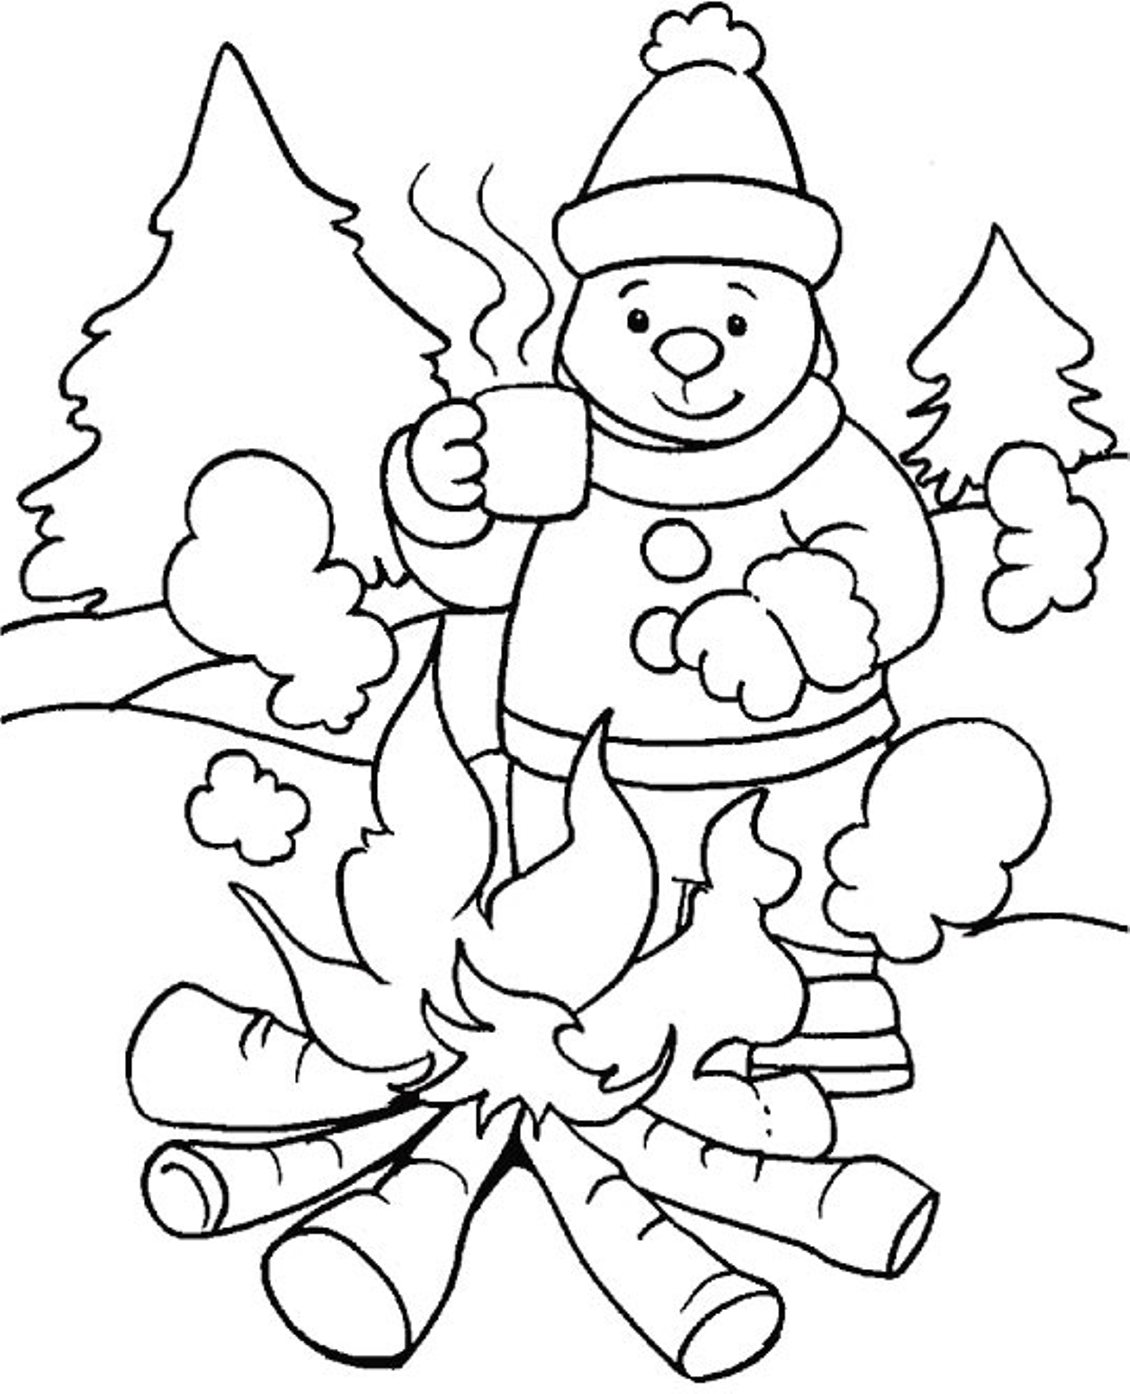 Coloring page: Winter season (Nature) #164393 - Free Printable Coloring Pages